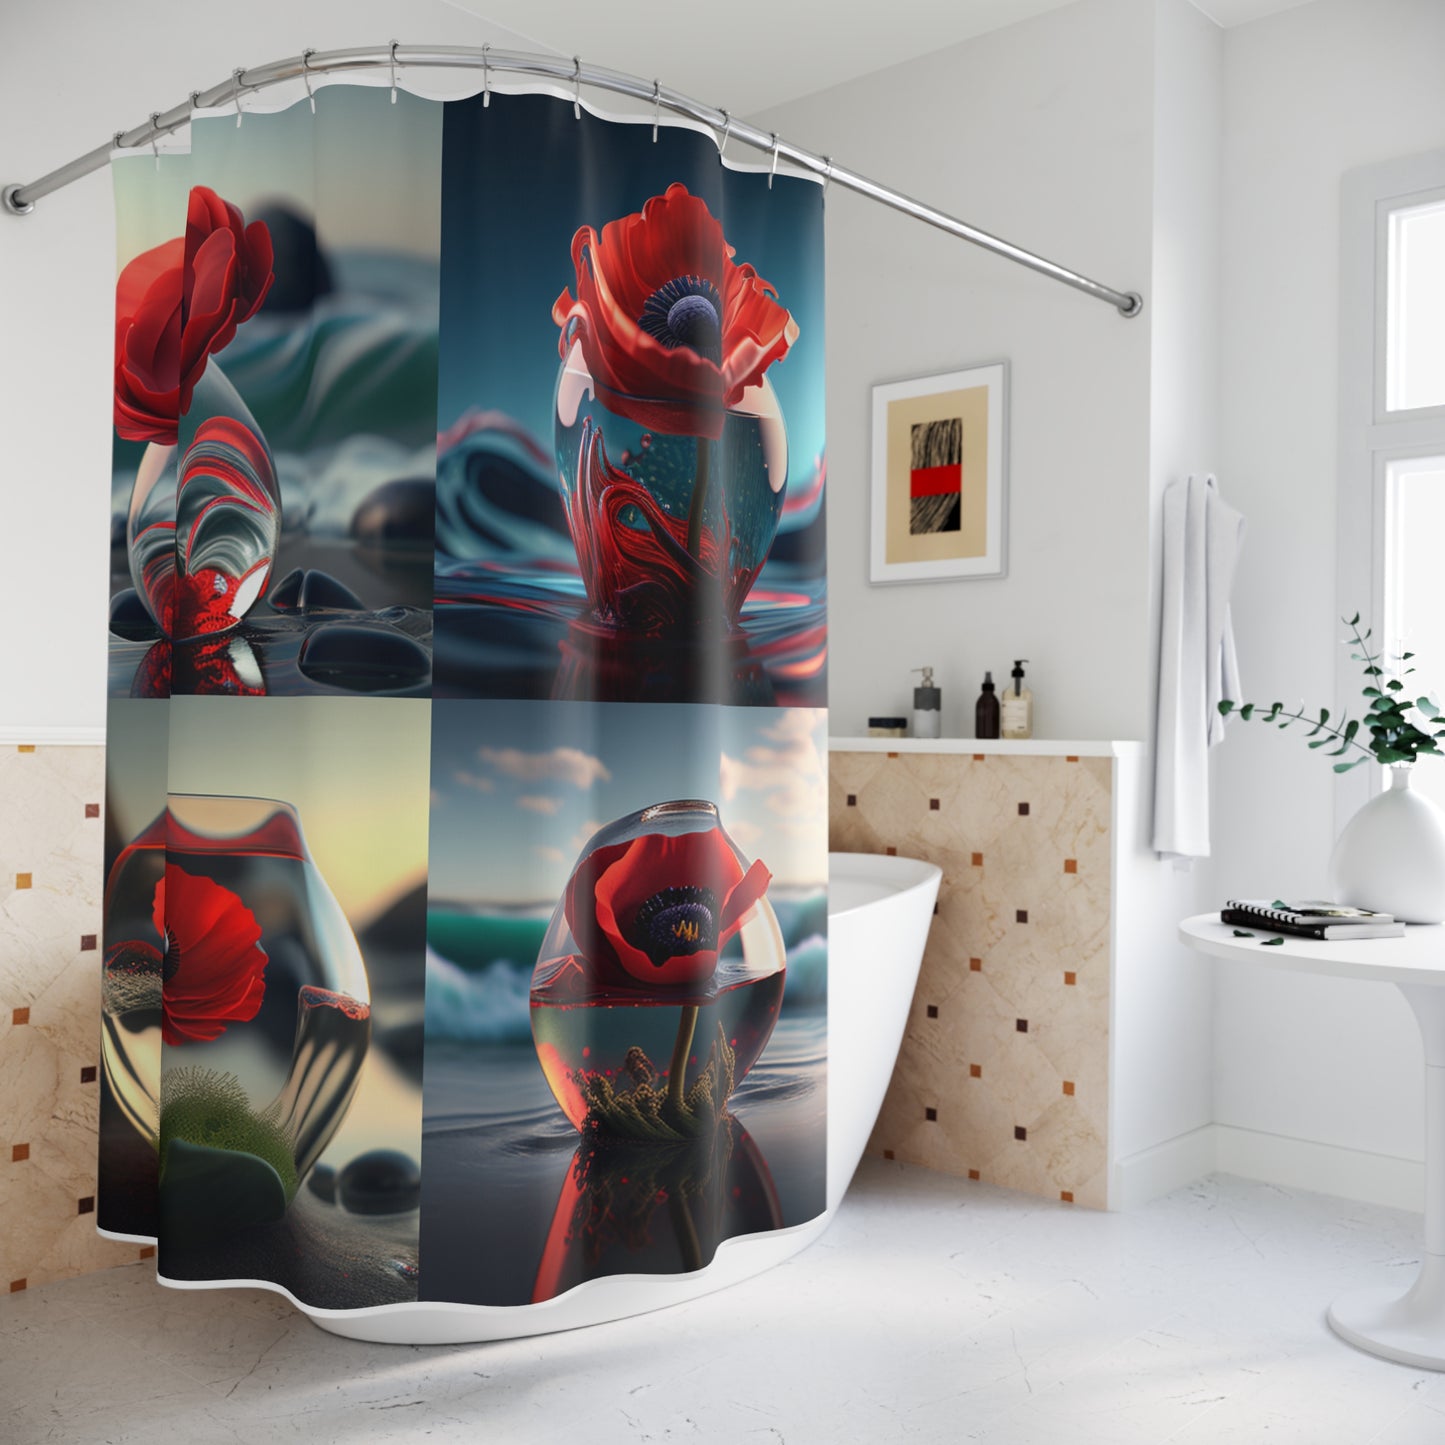 Polyester Shower Curtain Red Anemone in a Vase 5